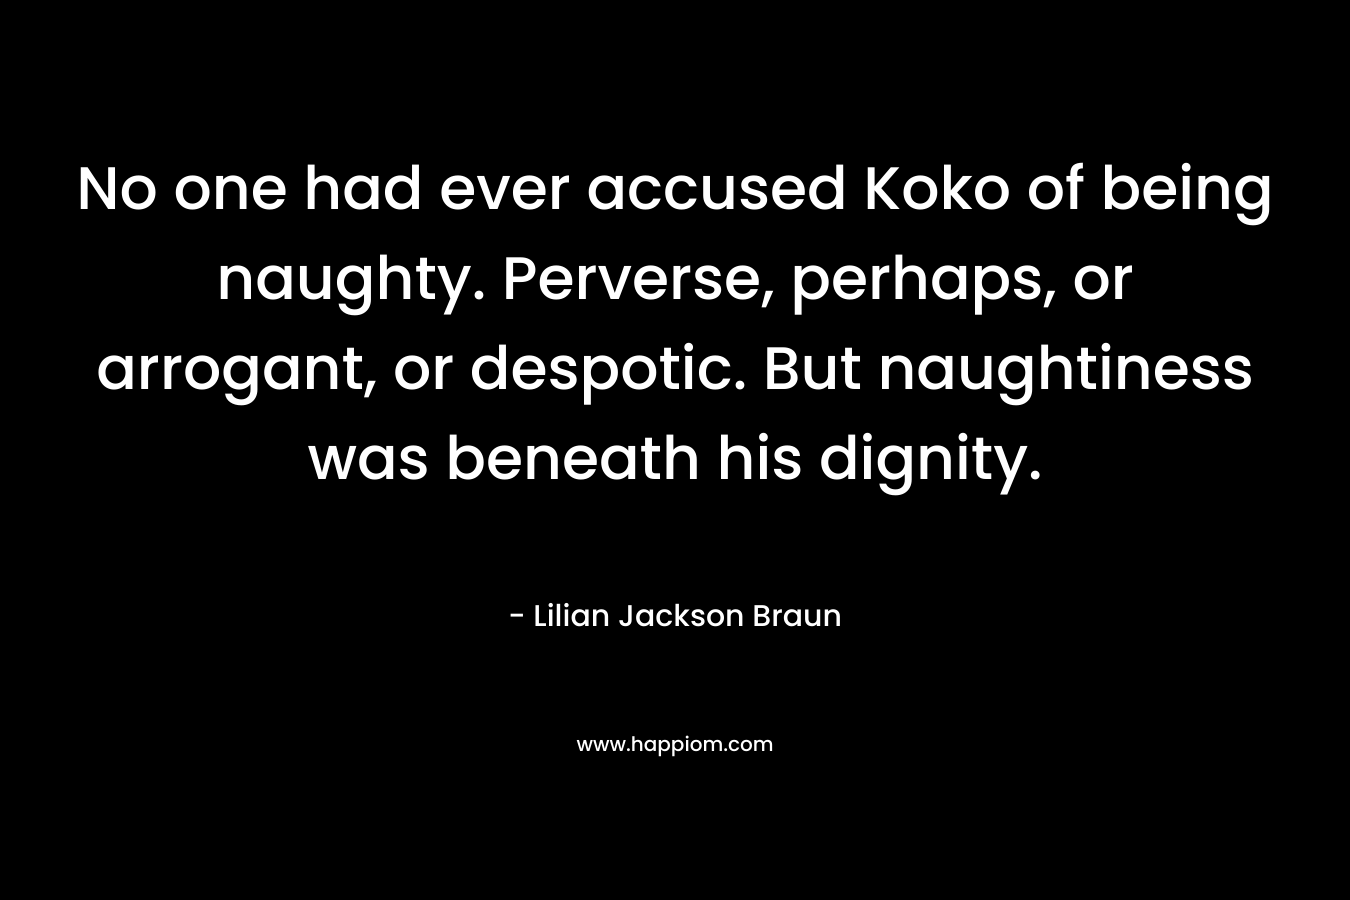 No one had ever accused Koko of being naughty. Perverse, perhaps, or arrogant, or despotic. But naughtiness was beneath his dignity. – Lilian Jackson Braun